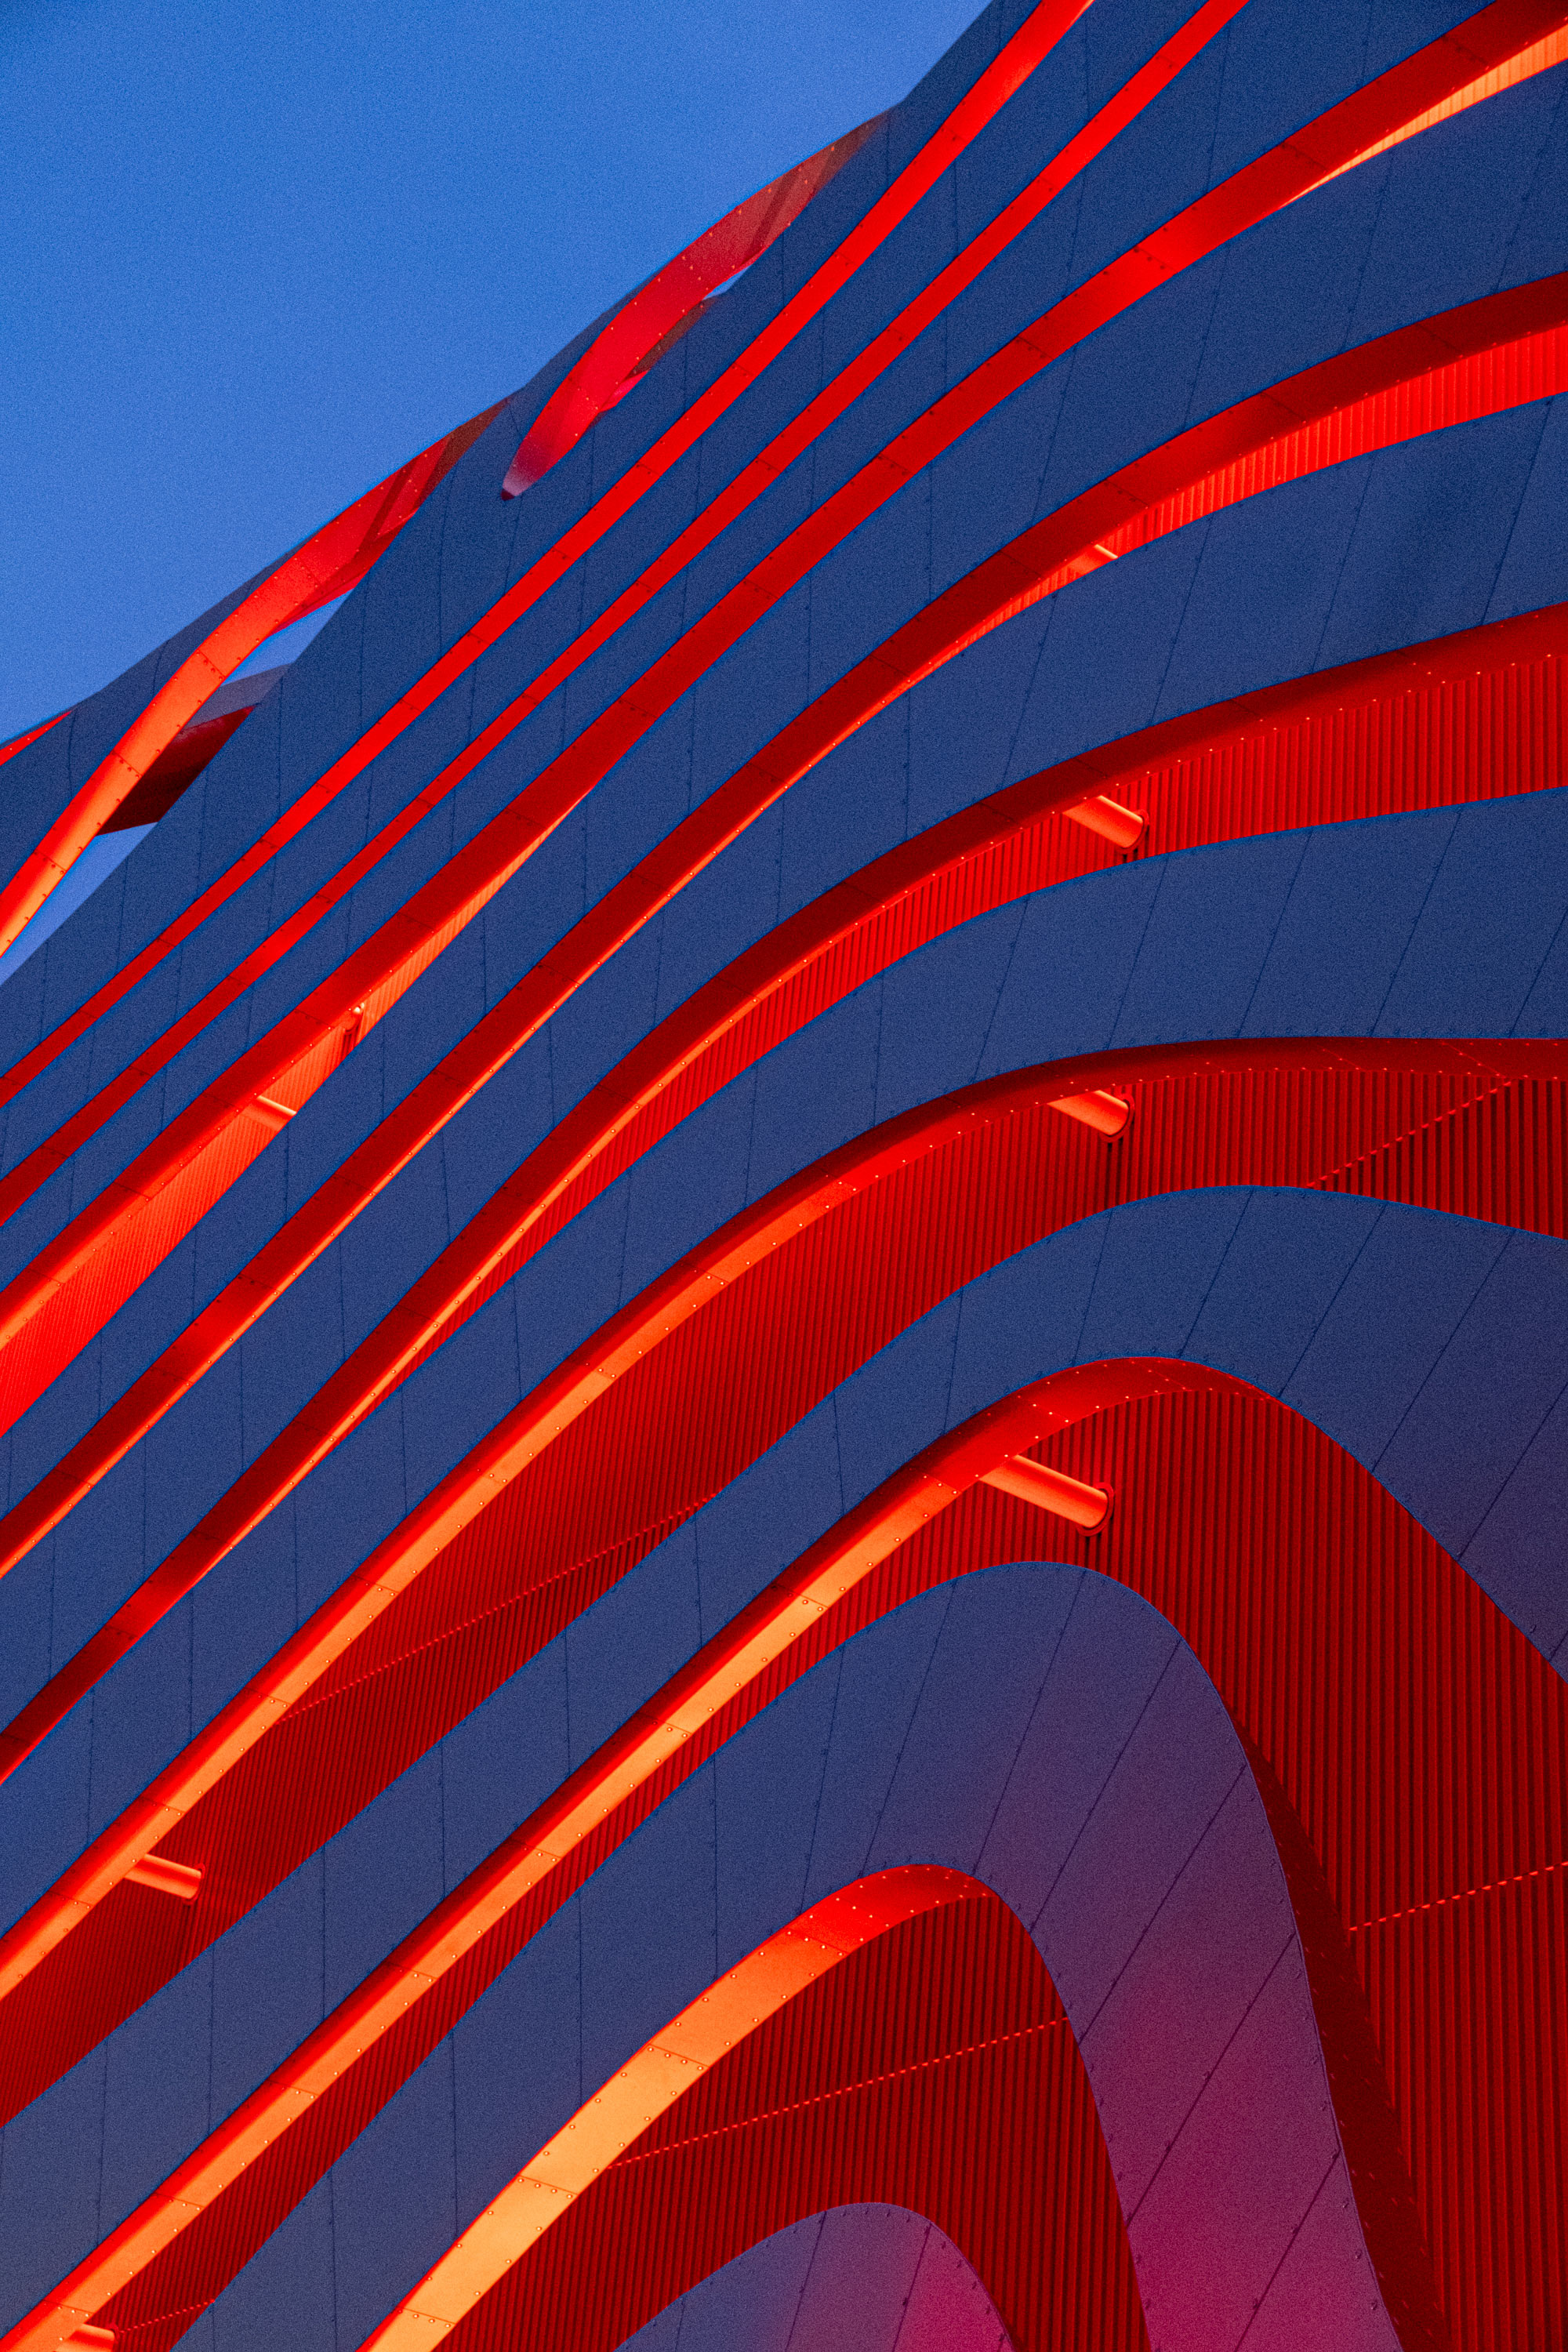 Petersen Auto Museum By Candia Peterson ARPS